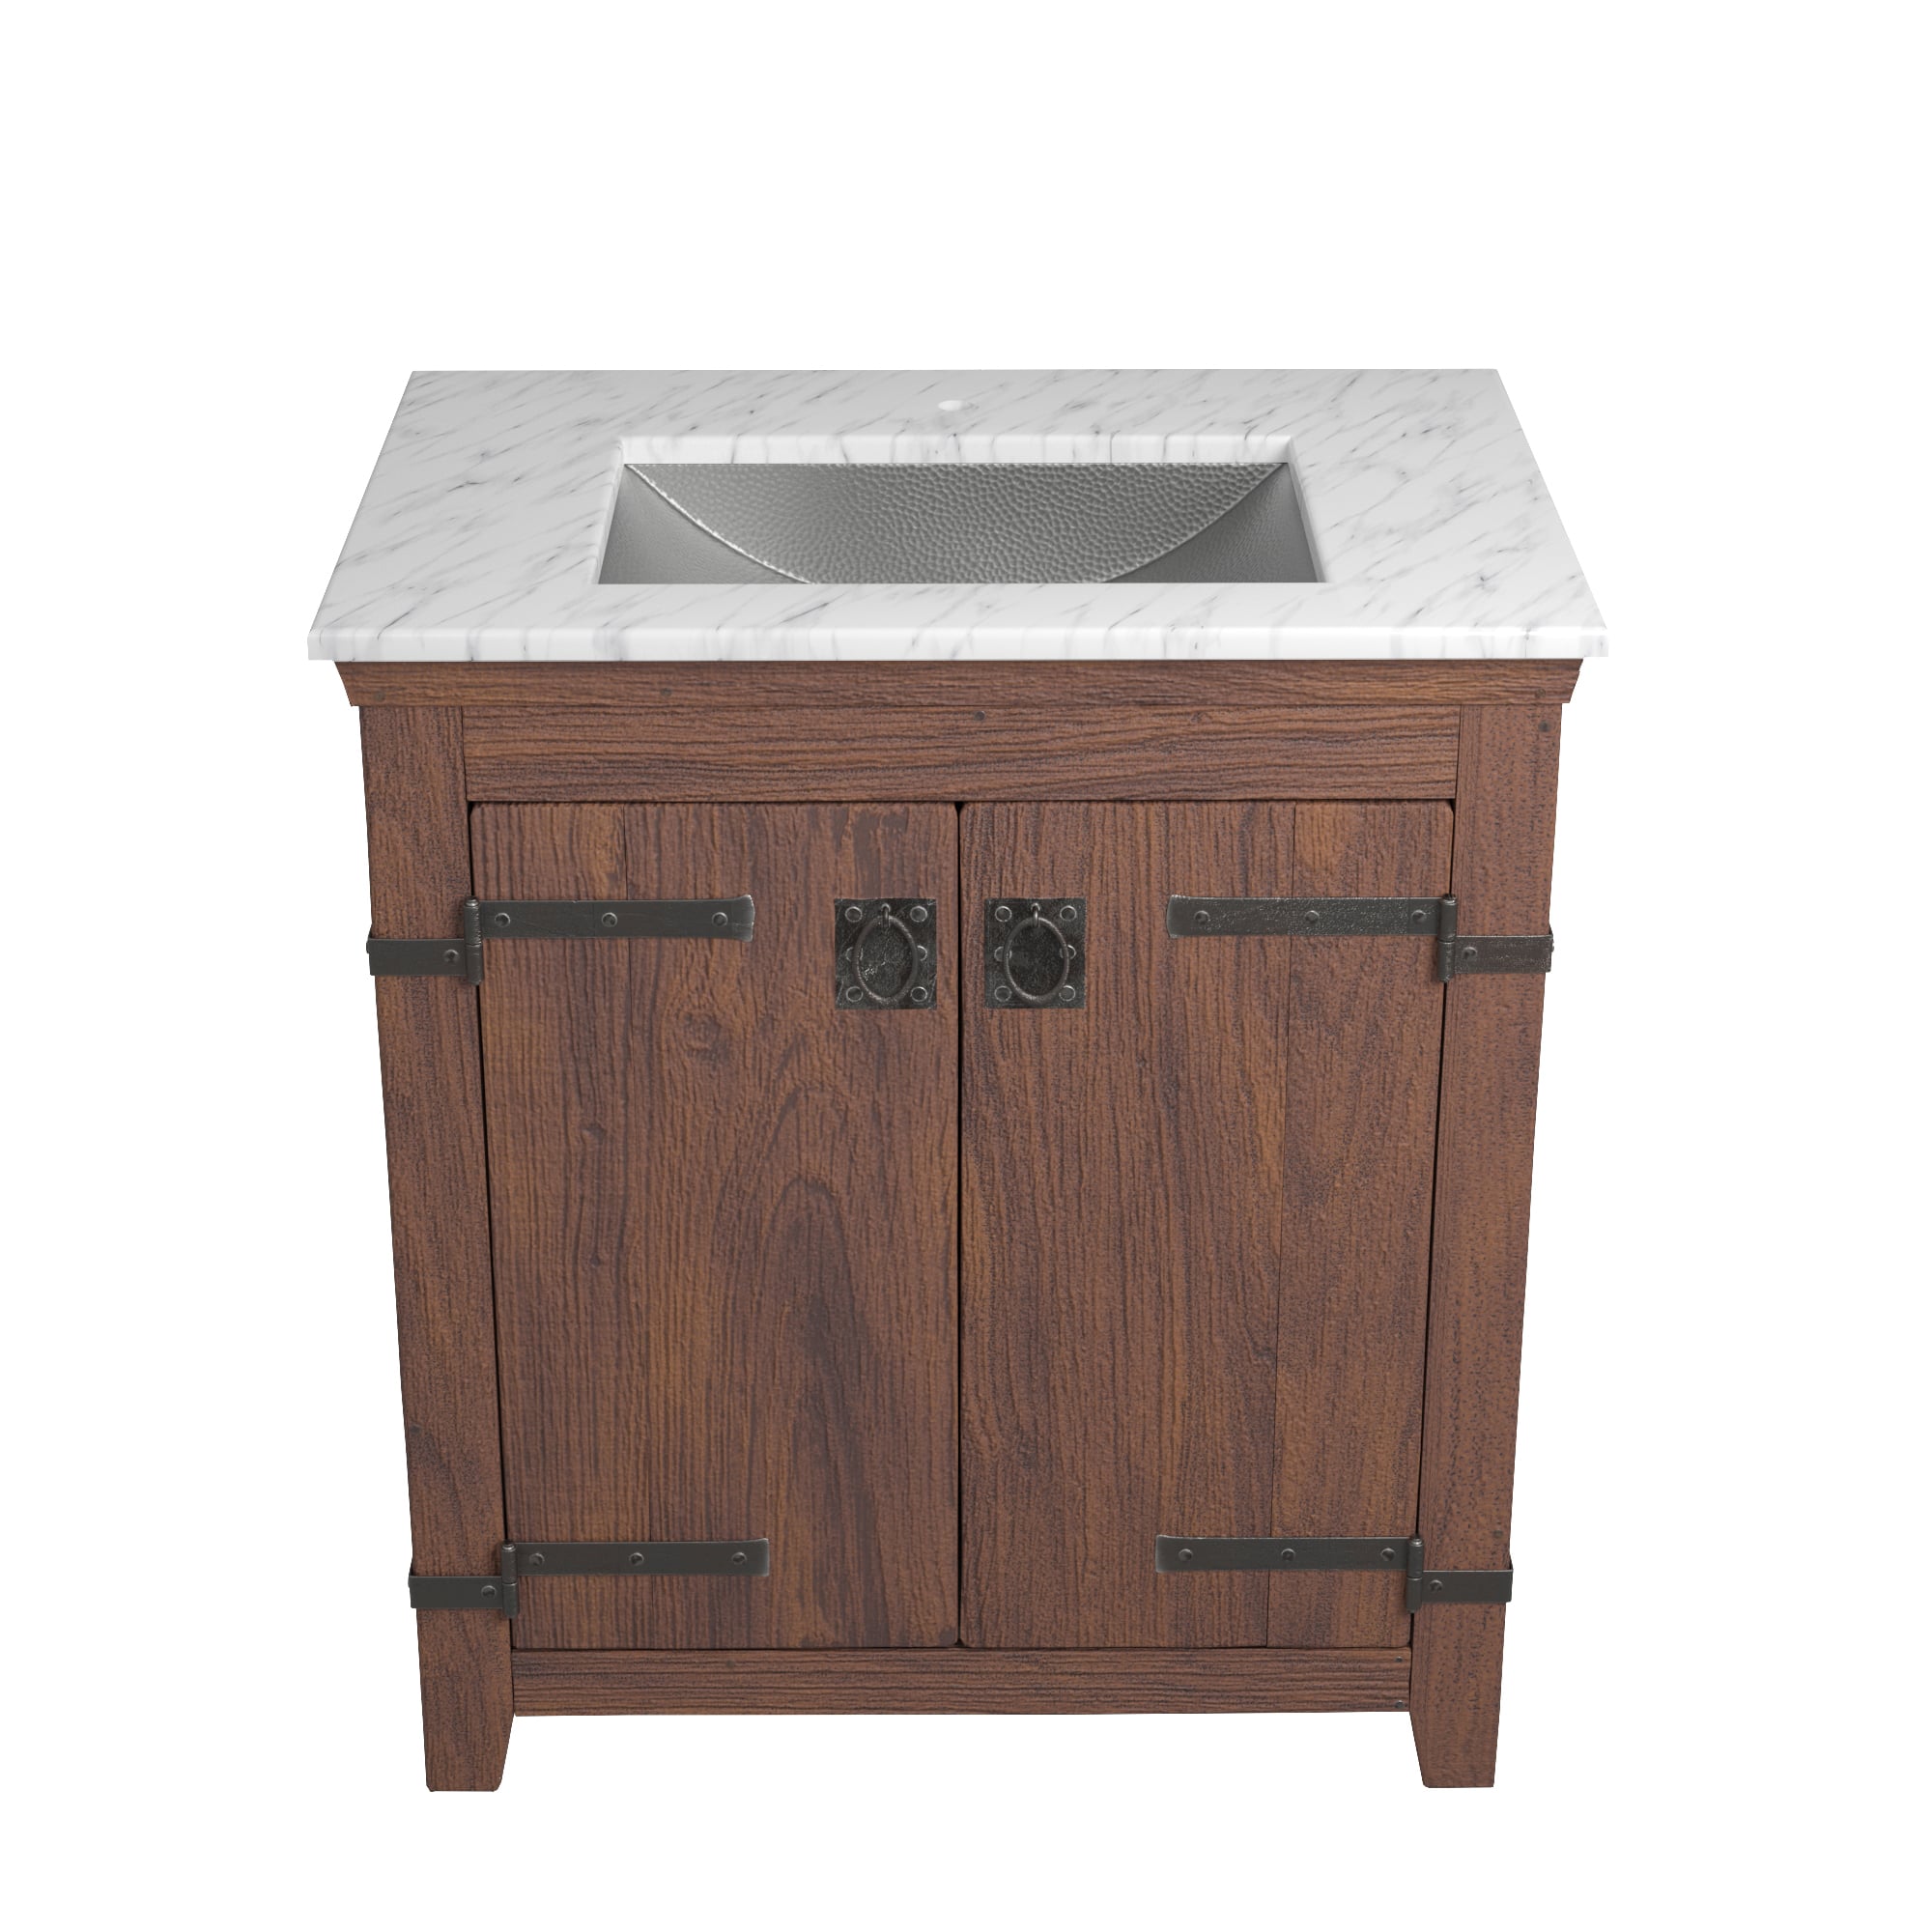 Native Trails 30" Americana Vanity in Chestnut with Carrara Marble Top and Avila in Brushed Nickel, Single Faucet Hole, BND30-VB-CT-CP-019